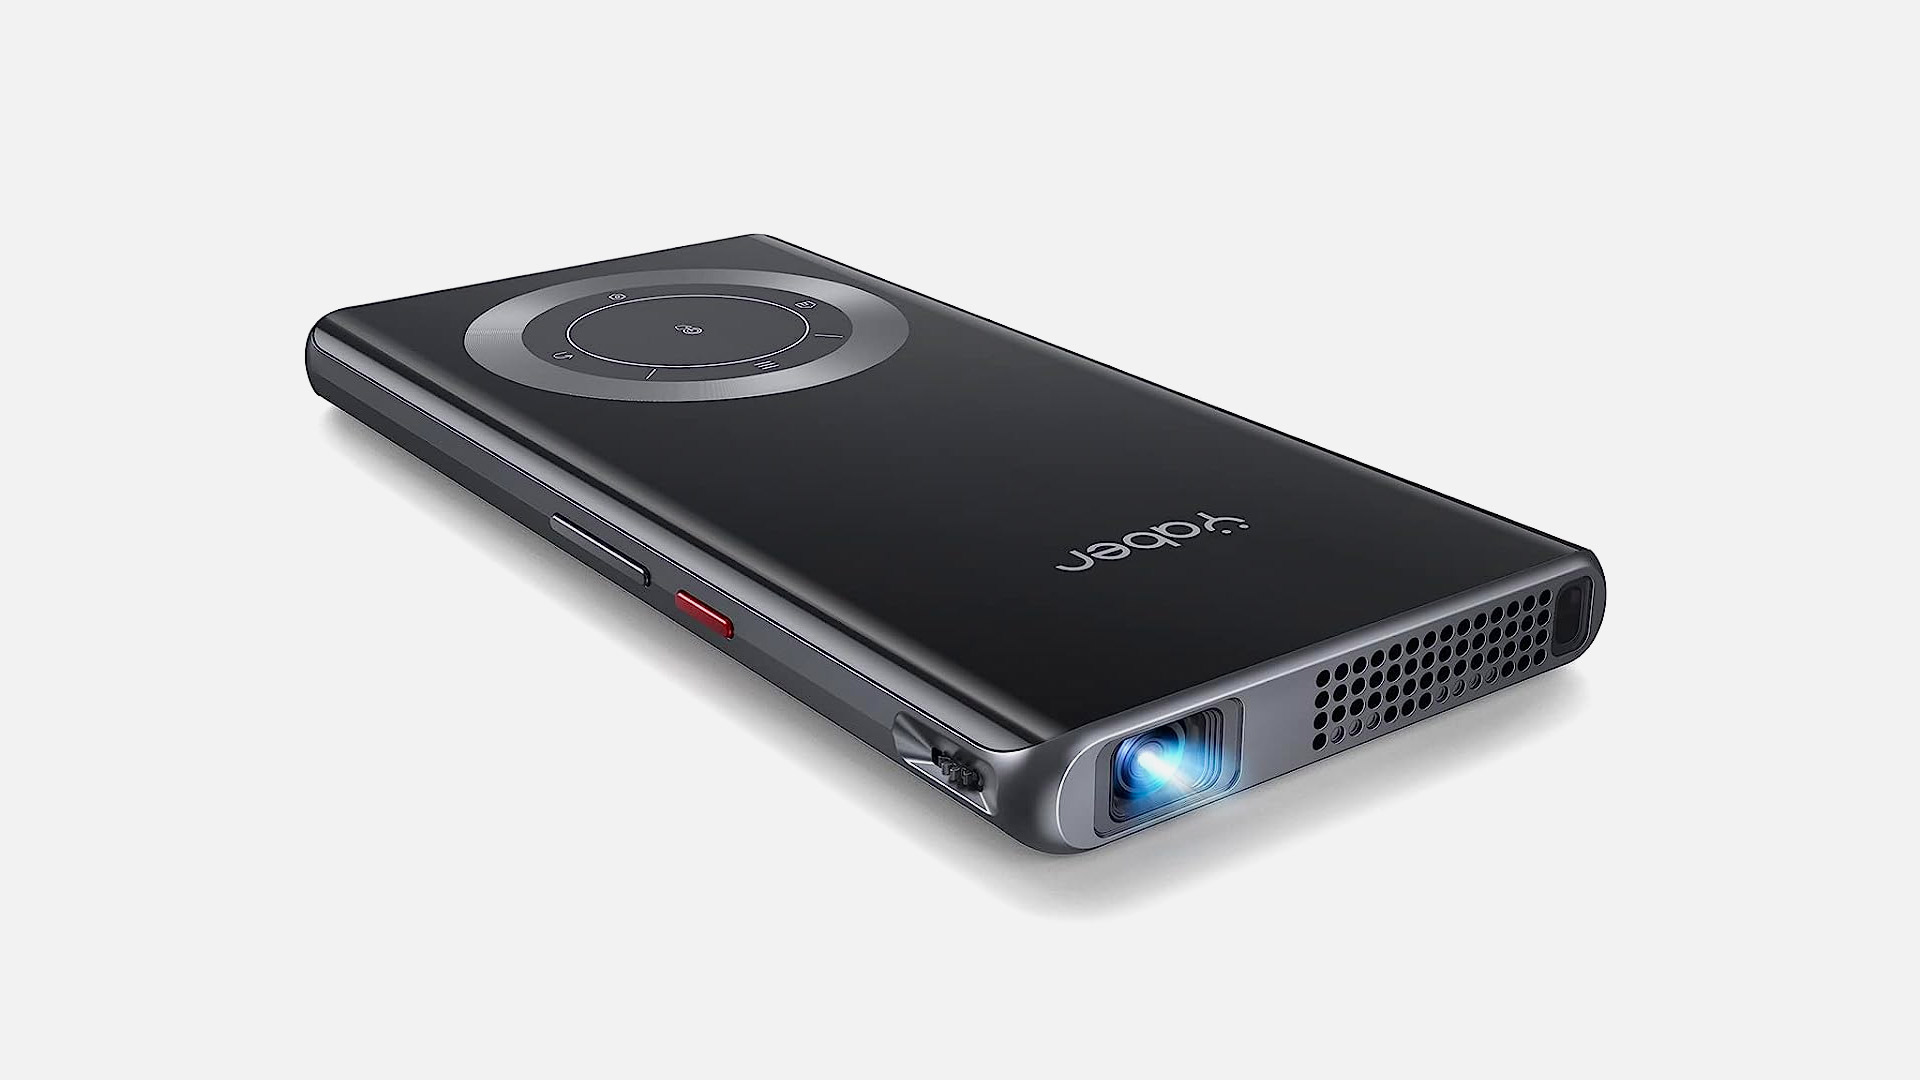 Yaber PICO T1 smart projector: The Slimmest and Portable Projector